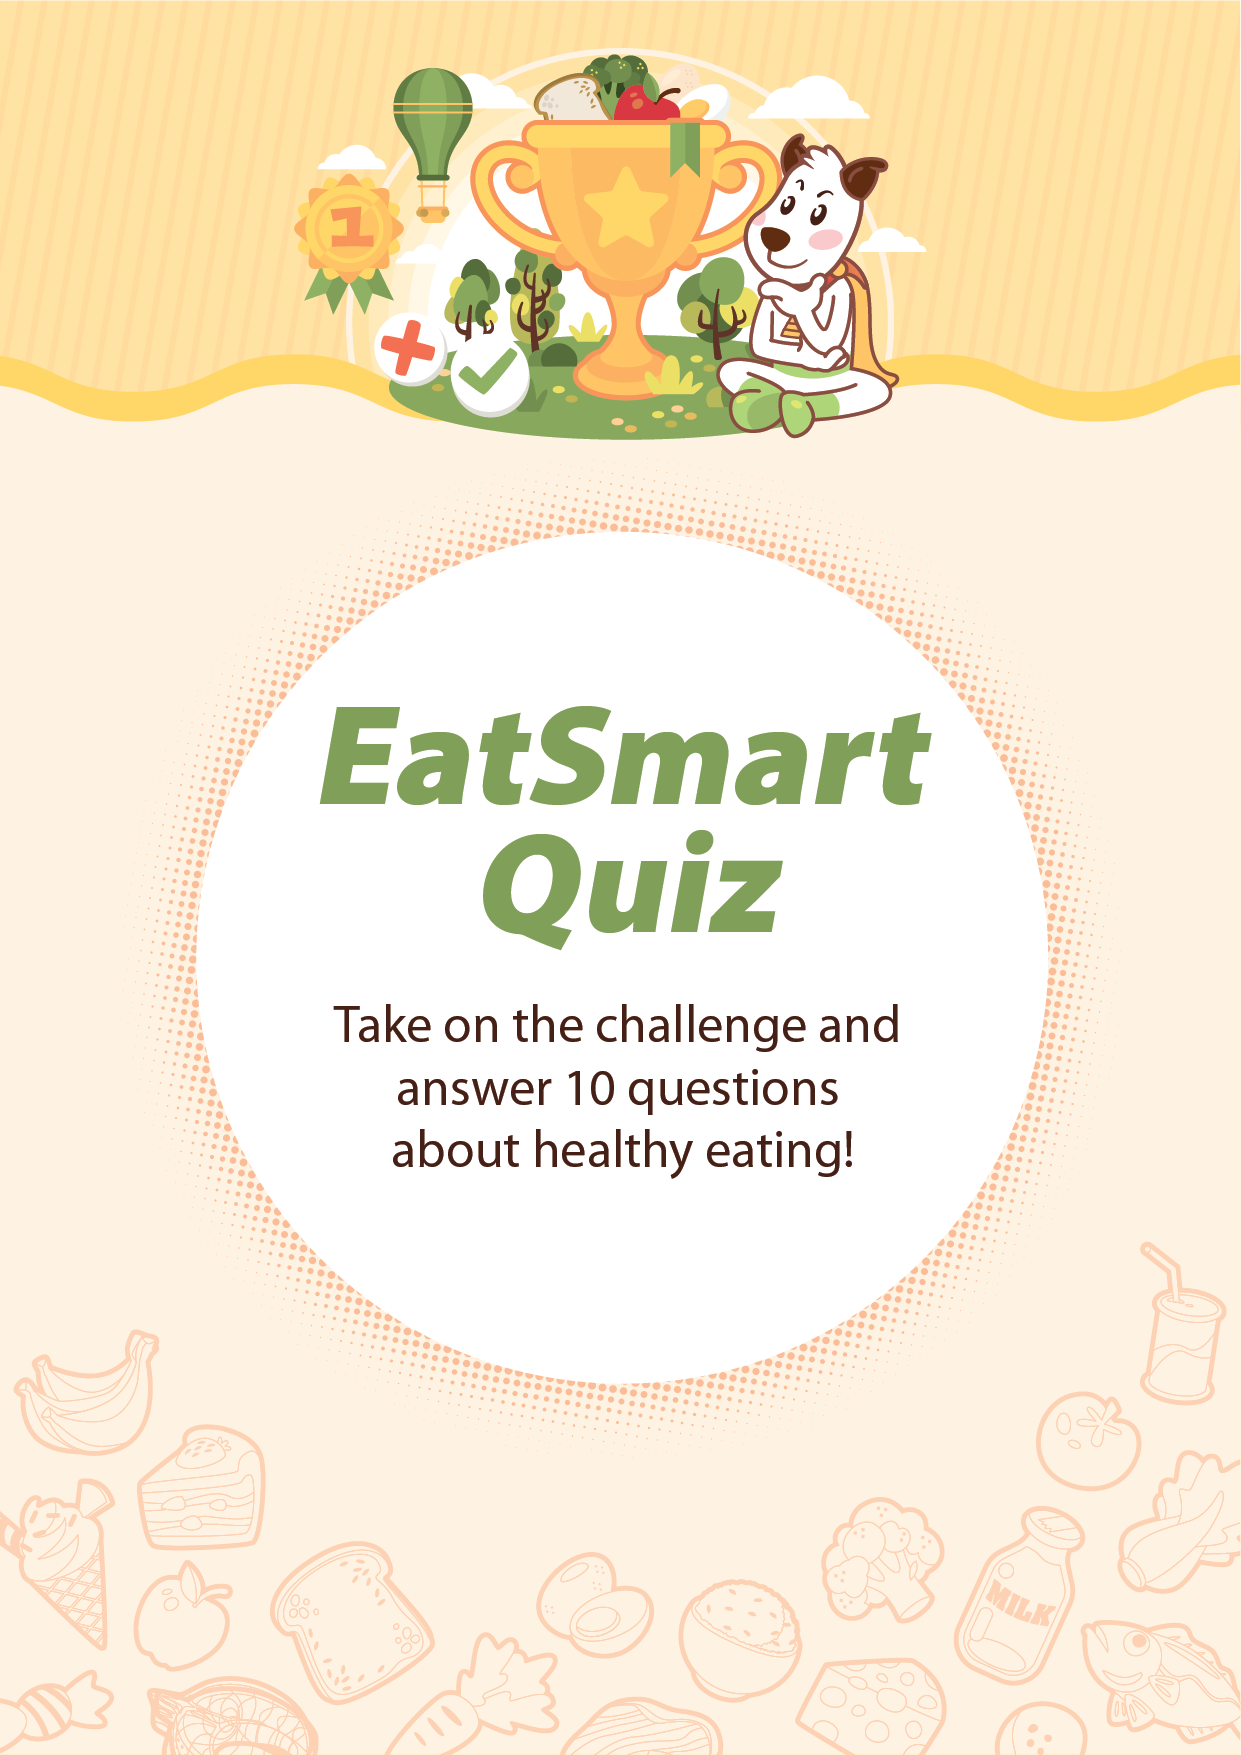 Resource Centre – Eat Smart Quiz Take on the challenge and answer 10 questions about healthy eating!